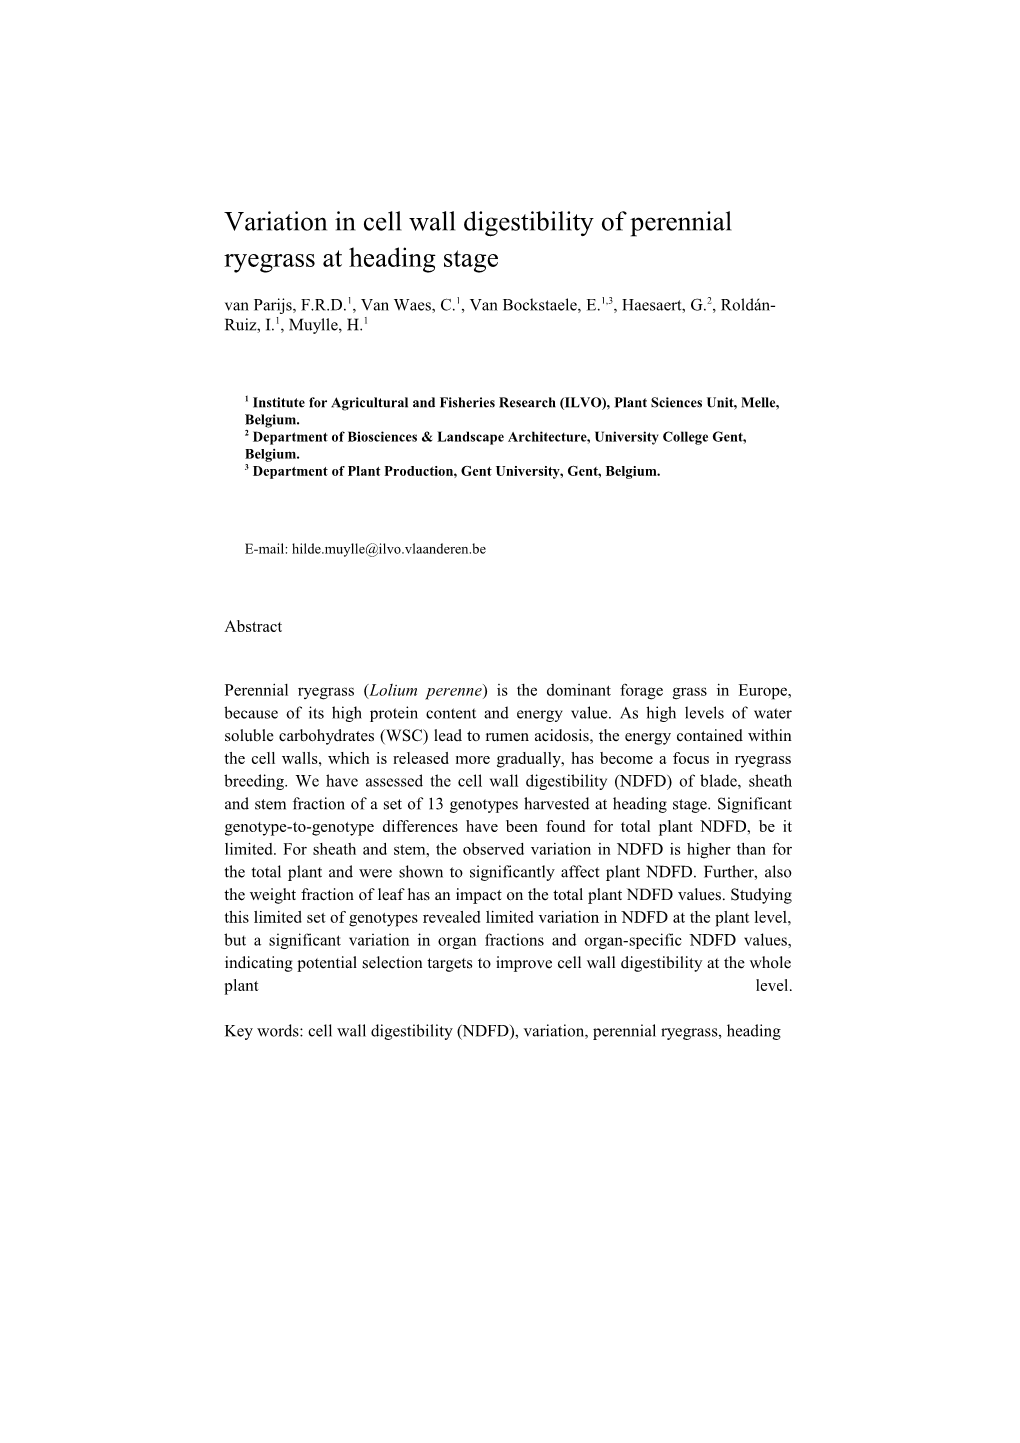 Variation in Cell Wall Digestibility of Perennial Ryegrass at Heading Stage